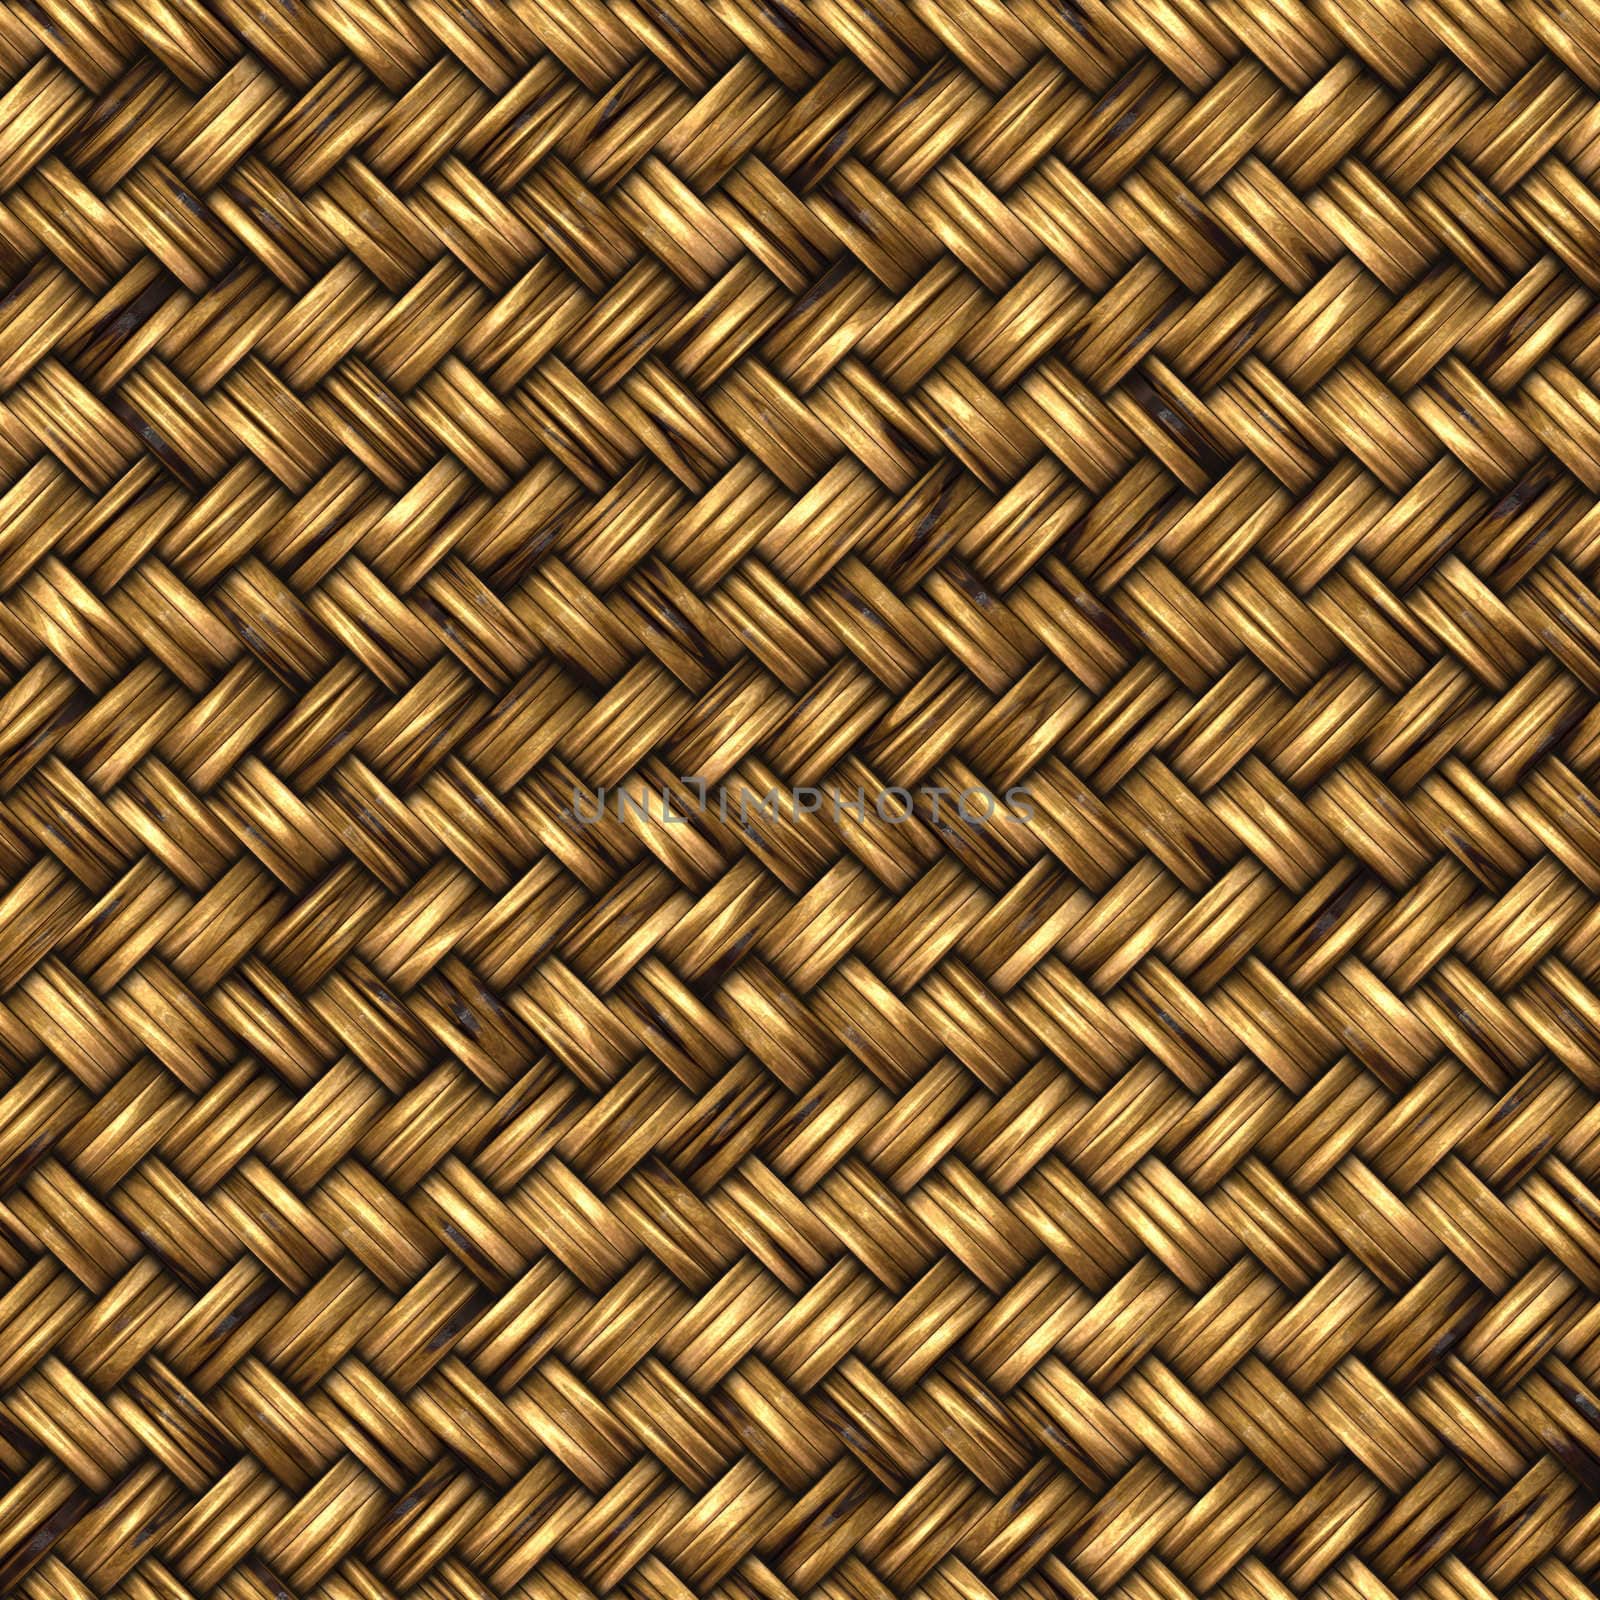 great background image of wooden bambo or wicker basket weave